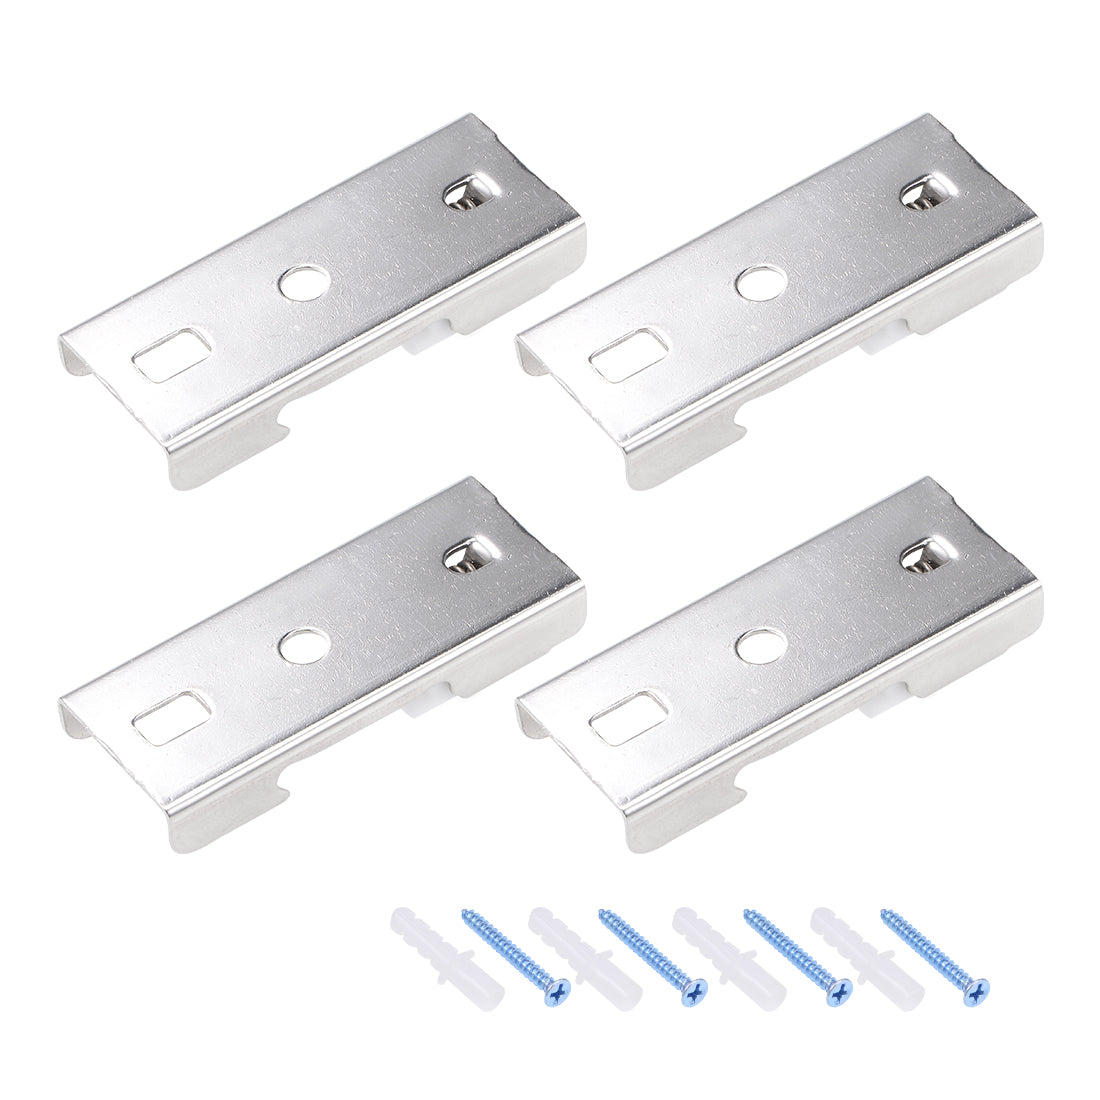 uxcell Uxcell Curtain Rod Bracket Stainless Steel Drapery Track Holder for 20mm Rail Top Mounted on Ceiling 4 Pcs